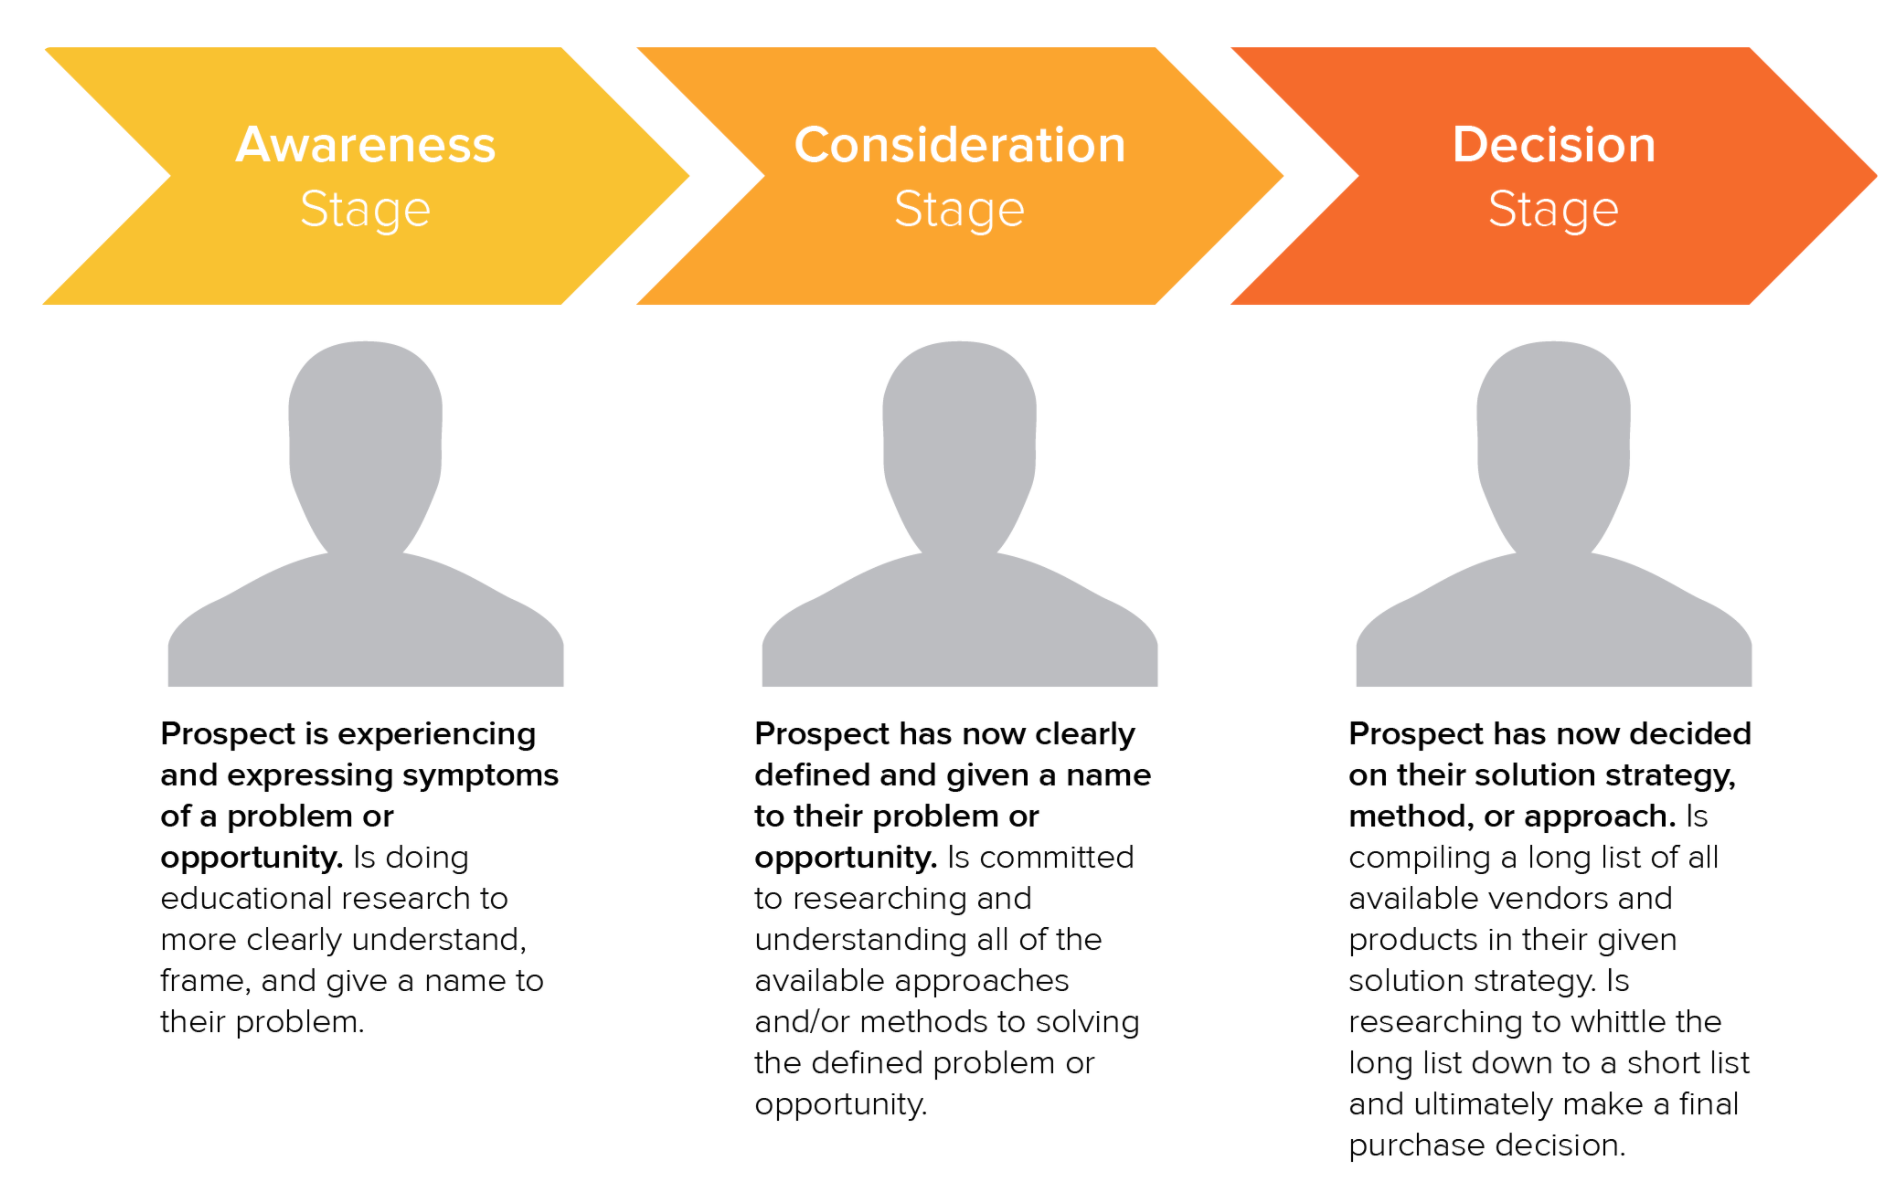 The key stages of the typical Buyer’s Journey